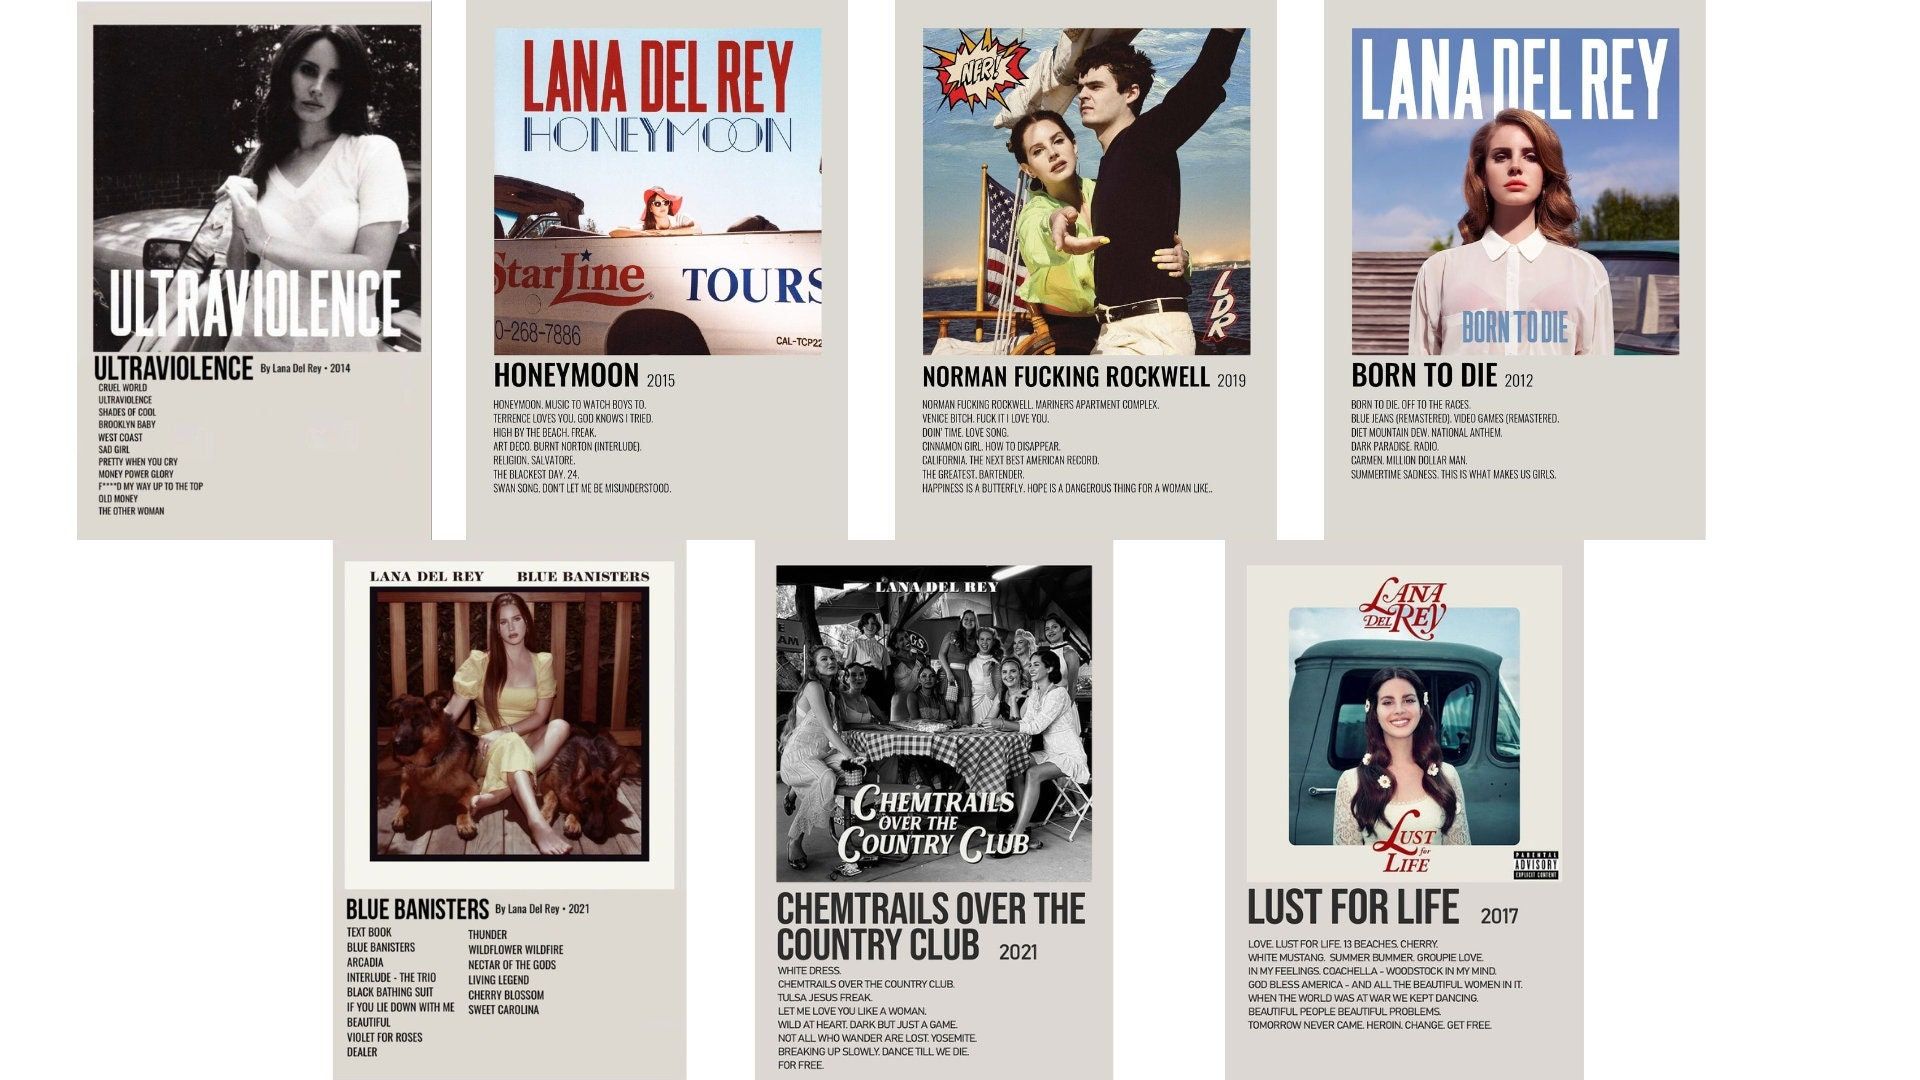 A collage of album covers featuring singer-songwriter Lana Del Rey. - Lana Del Rey